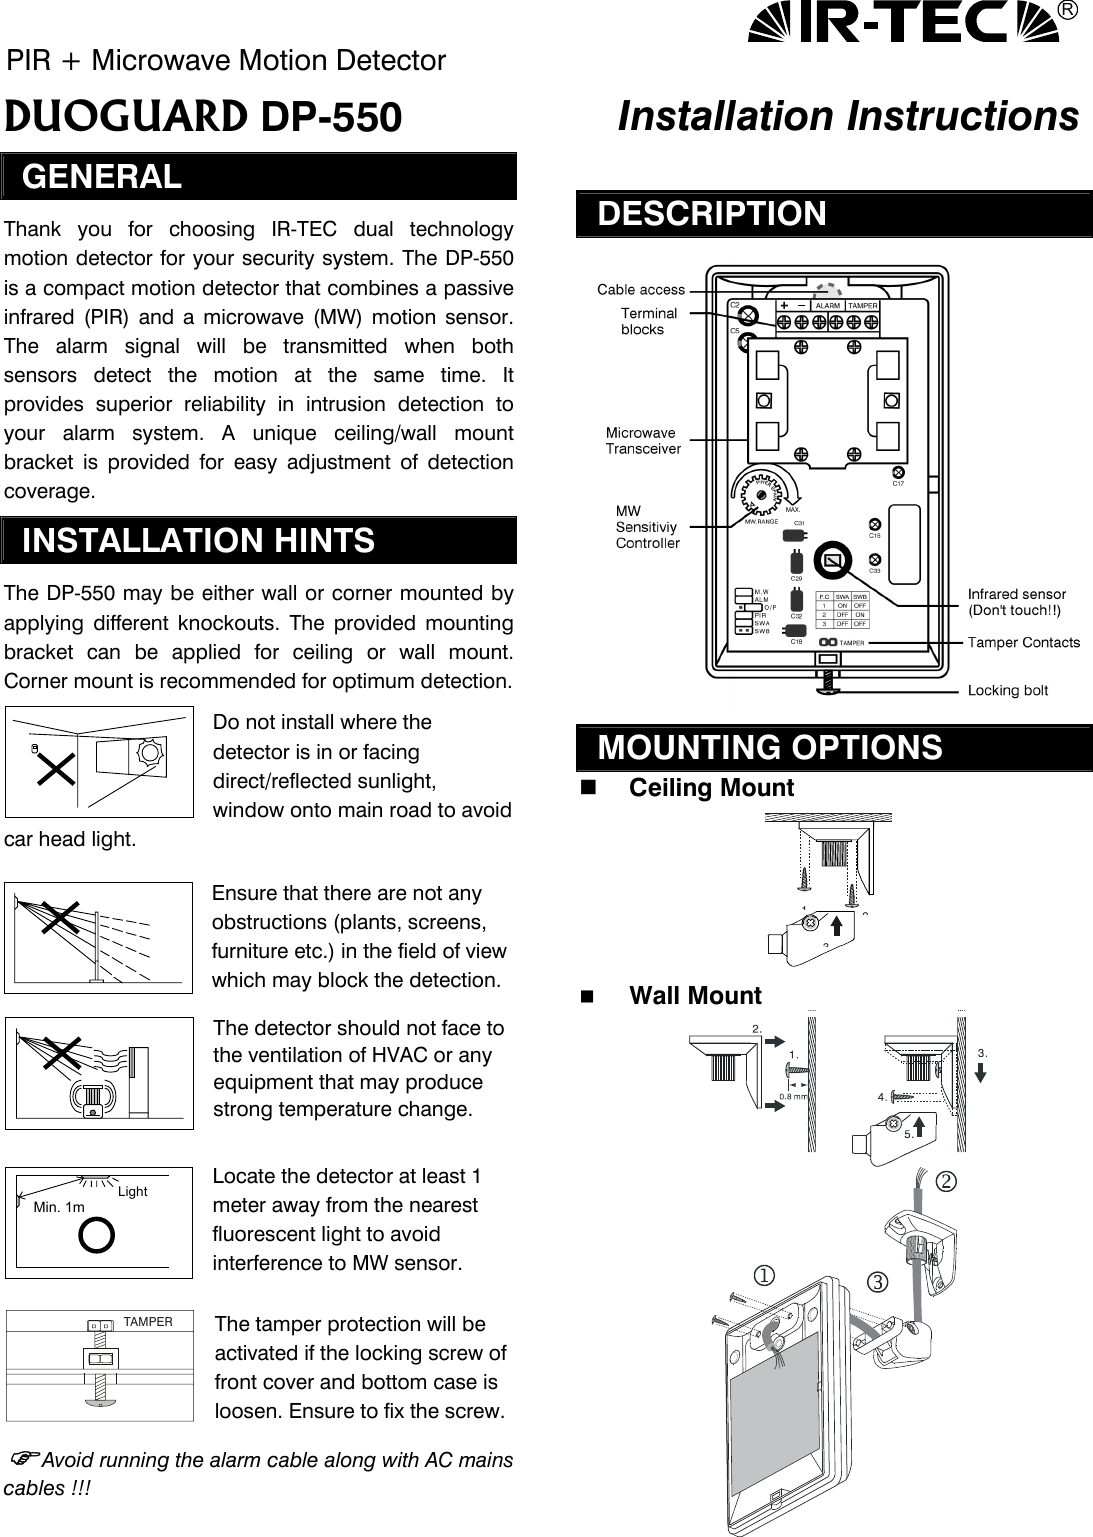 R PIR + Microwave Motion Detector DUOGUARD DP-550   Installation Instructions GENERAL Thank you for choosing IR-TEC dual technology motion detector for your security system. The DP-550 is a compact motion detector that combines a passive infrared (PIR) and a microwave (MW) motion sensor. The alarm signal will be transmitted when both sensors detect the motion at the same time. It provides superior reliability in intrusion detection to your alarm system. A unique ceiling/wall mount bracket is provided for easy adjustment of detection coverage.   INSTALLATION HINTS The DP-550 may be either wall or corner mounted by applying different knockouts. The provided mounting bracket can be applied for ceiling or wall mount. Corner mount is recommended for optimum detection. Do not install where the detector is in or facing direct/reflected sunlight, window onto main road to avoid car head light.   Ensure that there are not any obstructions (plants, screens, furniture etc.) in the field of view which may block the detection. The detector should not face to the ventilation of HVAC or any equipment that may produce strong temperature change.   Locate the detector at least 1 meter away from the nearest fluorescent light to avoid interference to MW sensor.  The tamper protection will be activated if the locking screw of front cover and bottom case is loosen. Ensure to fix the screw. Avoid running the alarm cable along with AC mains cables !!!   DESCRIPTION   MOUNTING OPTIONS   Ceiling Mount 132    Wall Mount   Min. 1mLight TAMPER